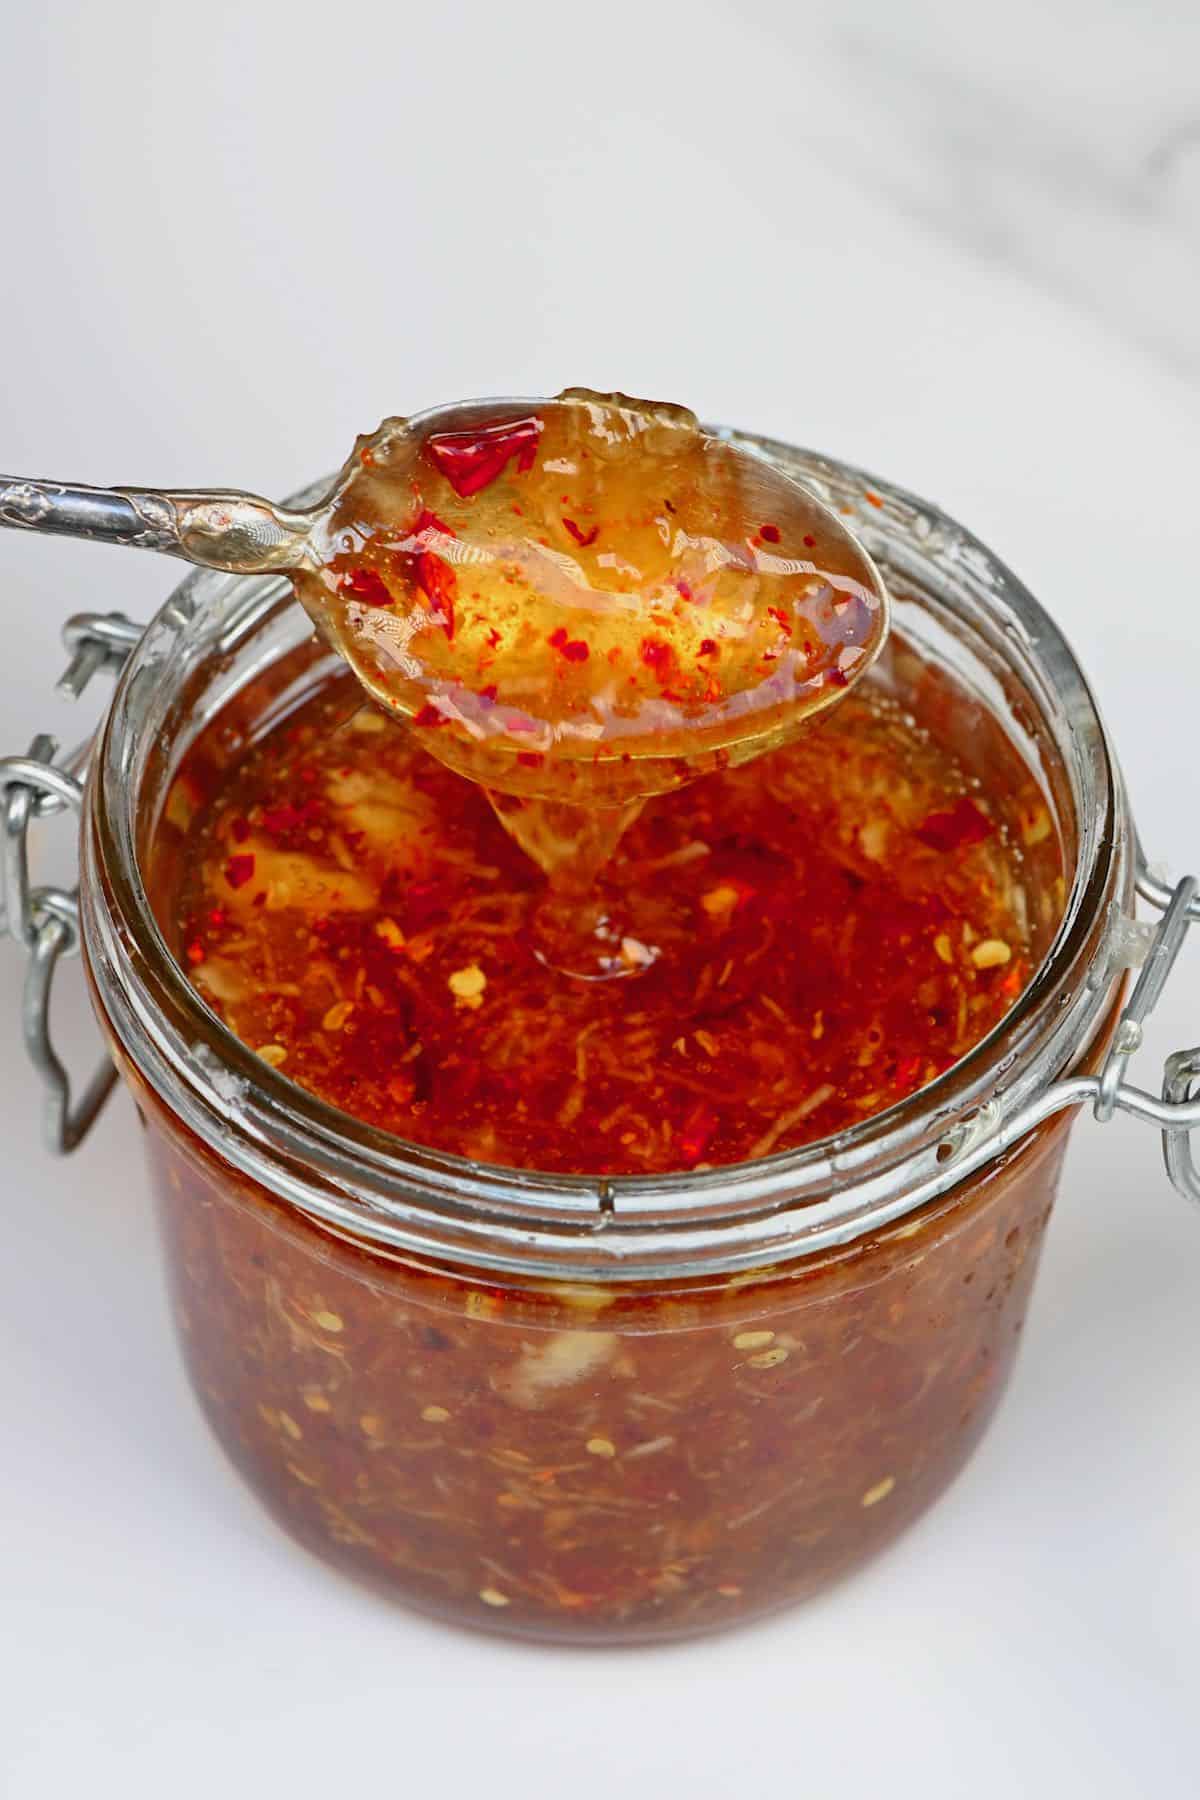 A spoonful of garlic chili honey dripping over a jar